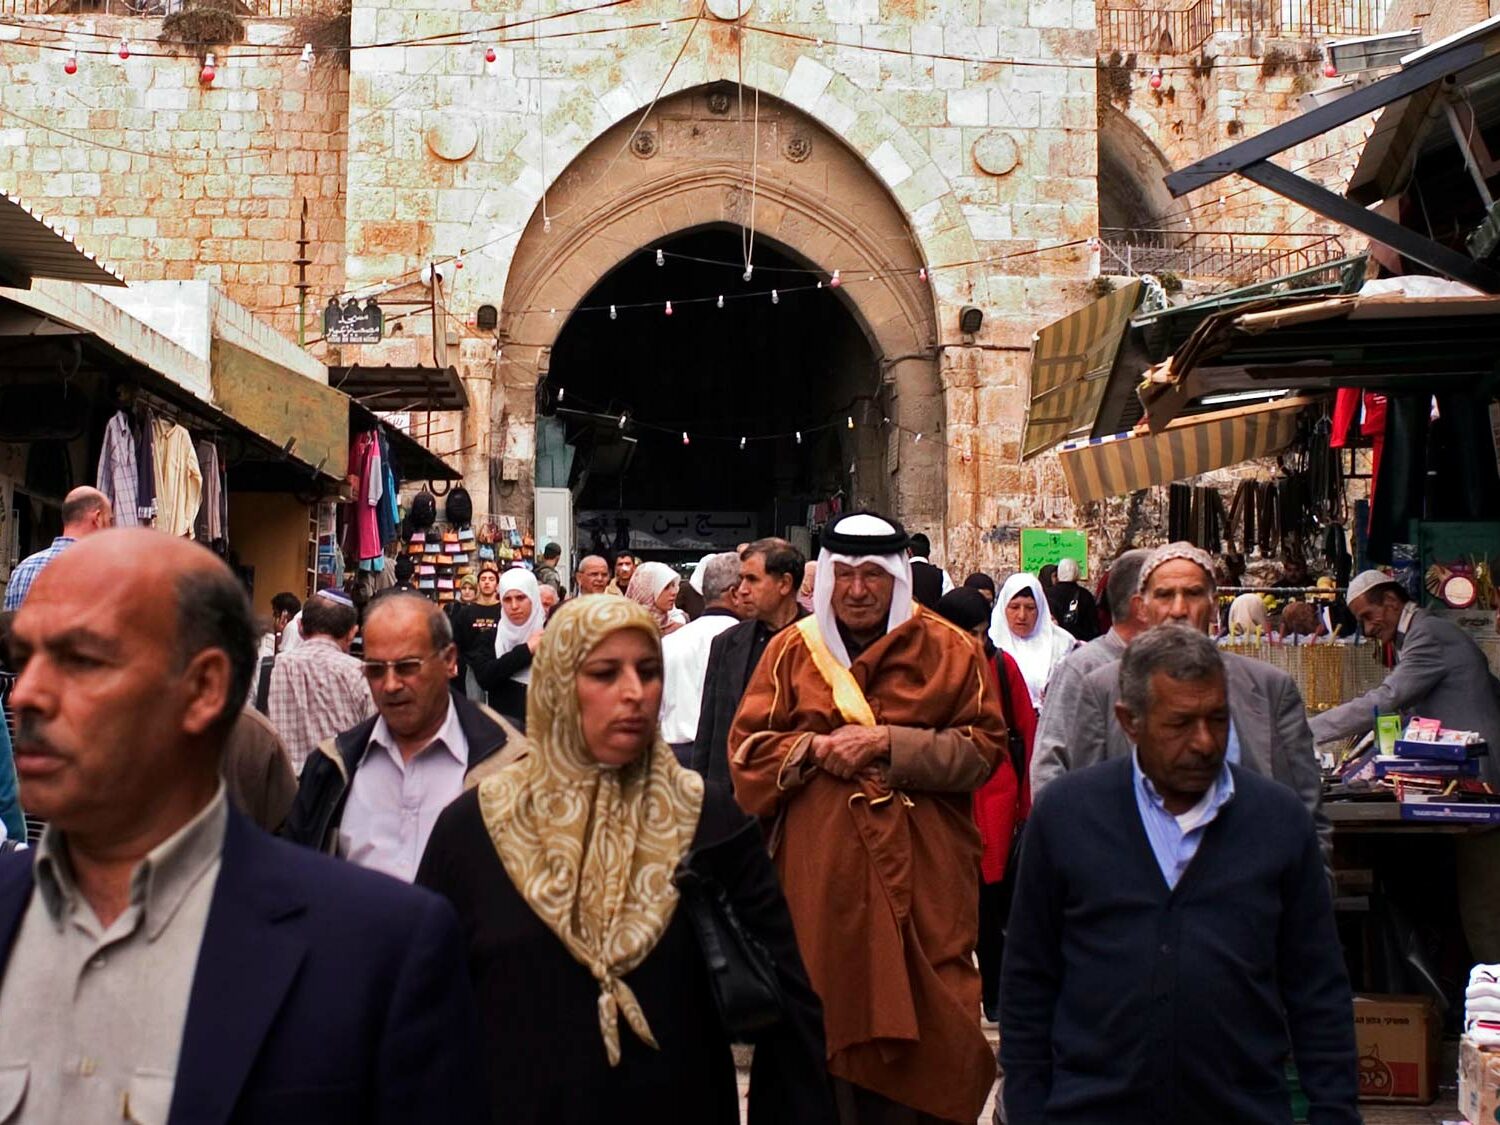 JERUSALEM & THE ISRAELI-ARAB CONFLICT BEHIND THE SCENES OF THE CONFLICT IN THE OLD CITY INTELLI-TOUR by Inside The Middle East | Avi Melamed